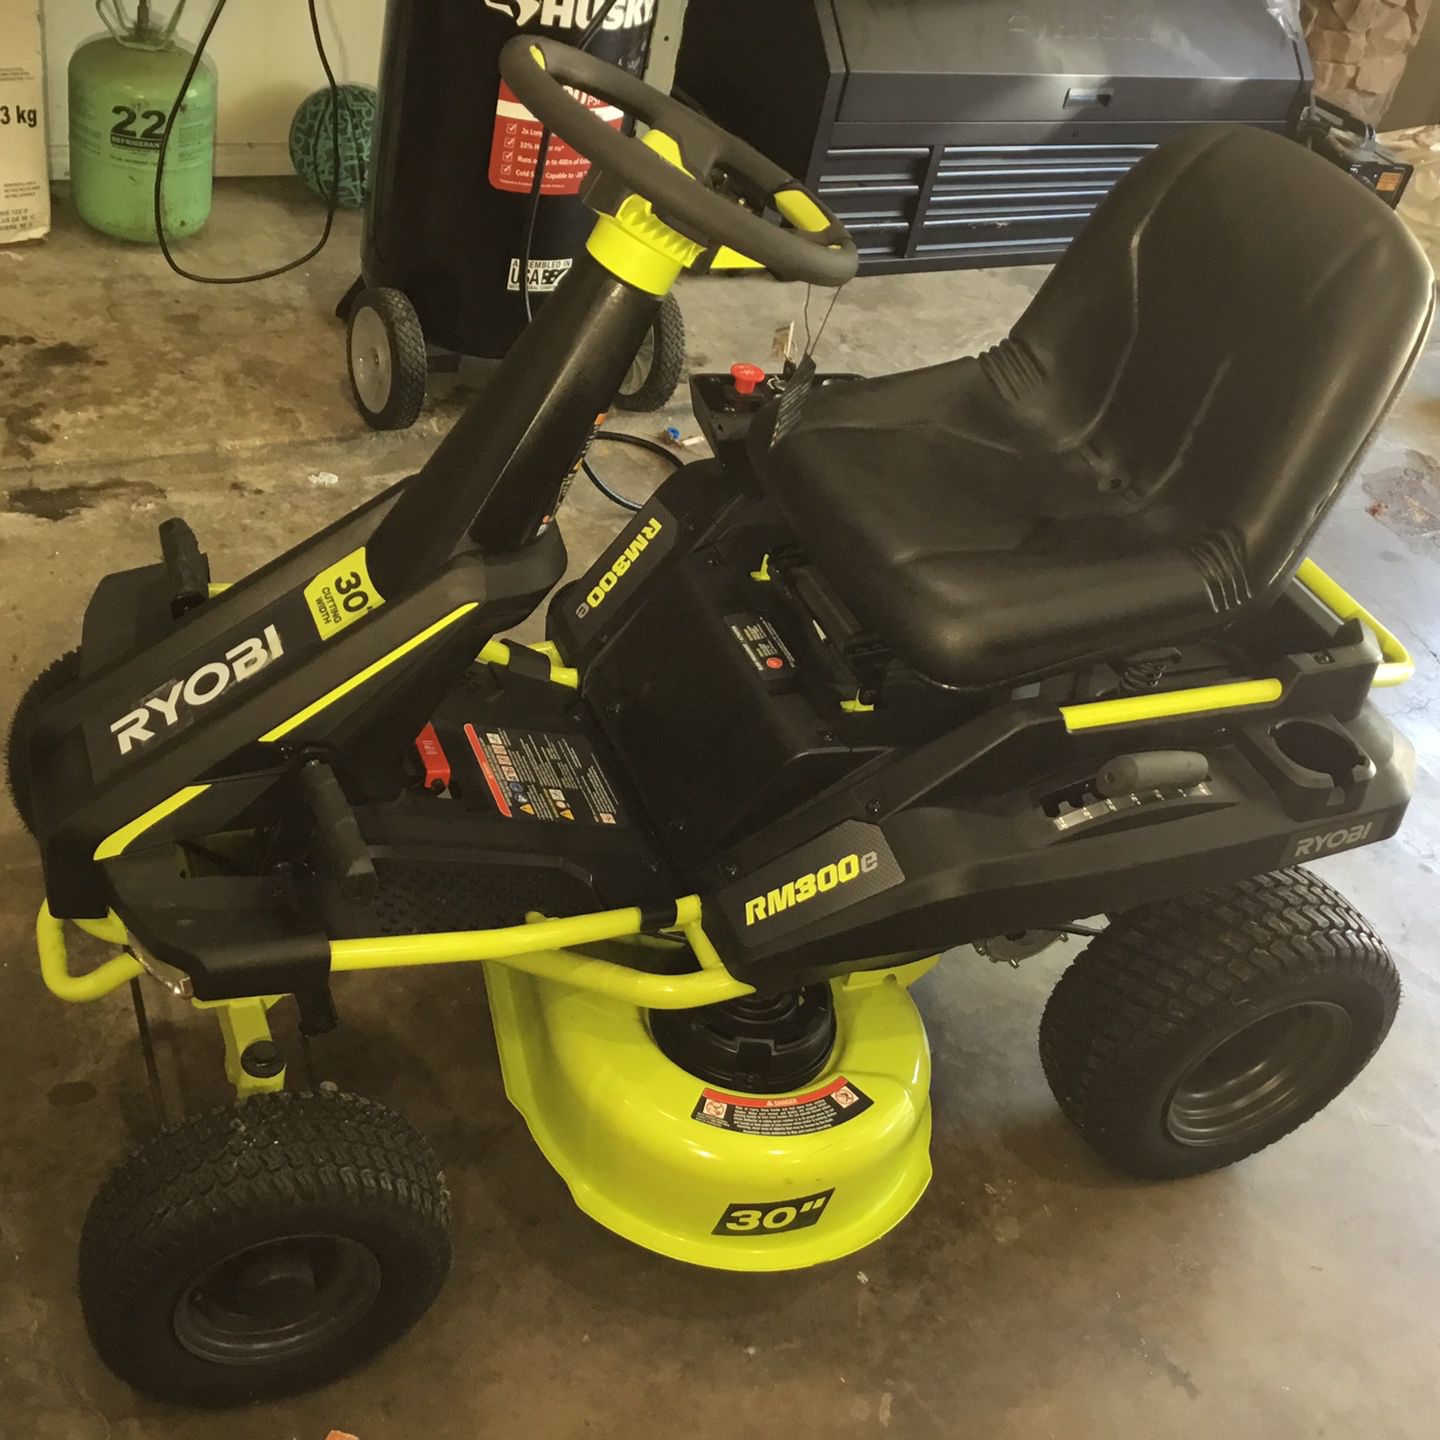 New Condition!  Ryobi 48V  Brushless 30” Battery Electric Rear Engine riding Mower!!  Model RM300e NEW With Charger, Retails $2999…. Only $1650 👍🏽